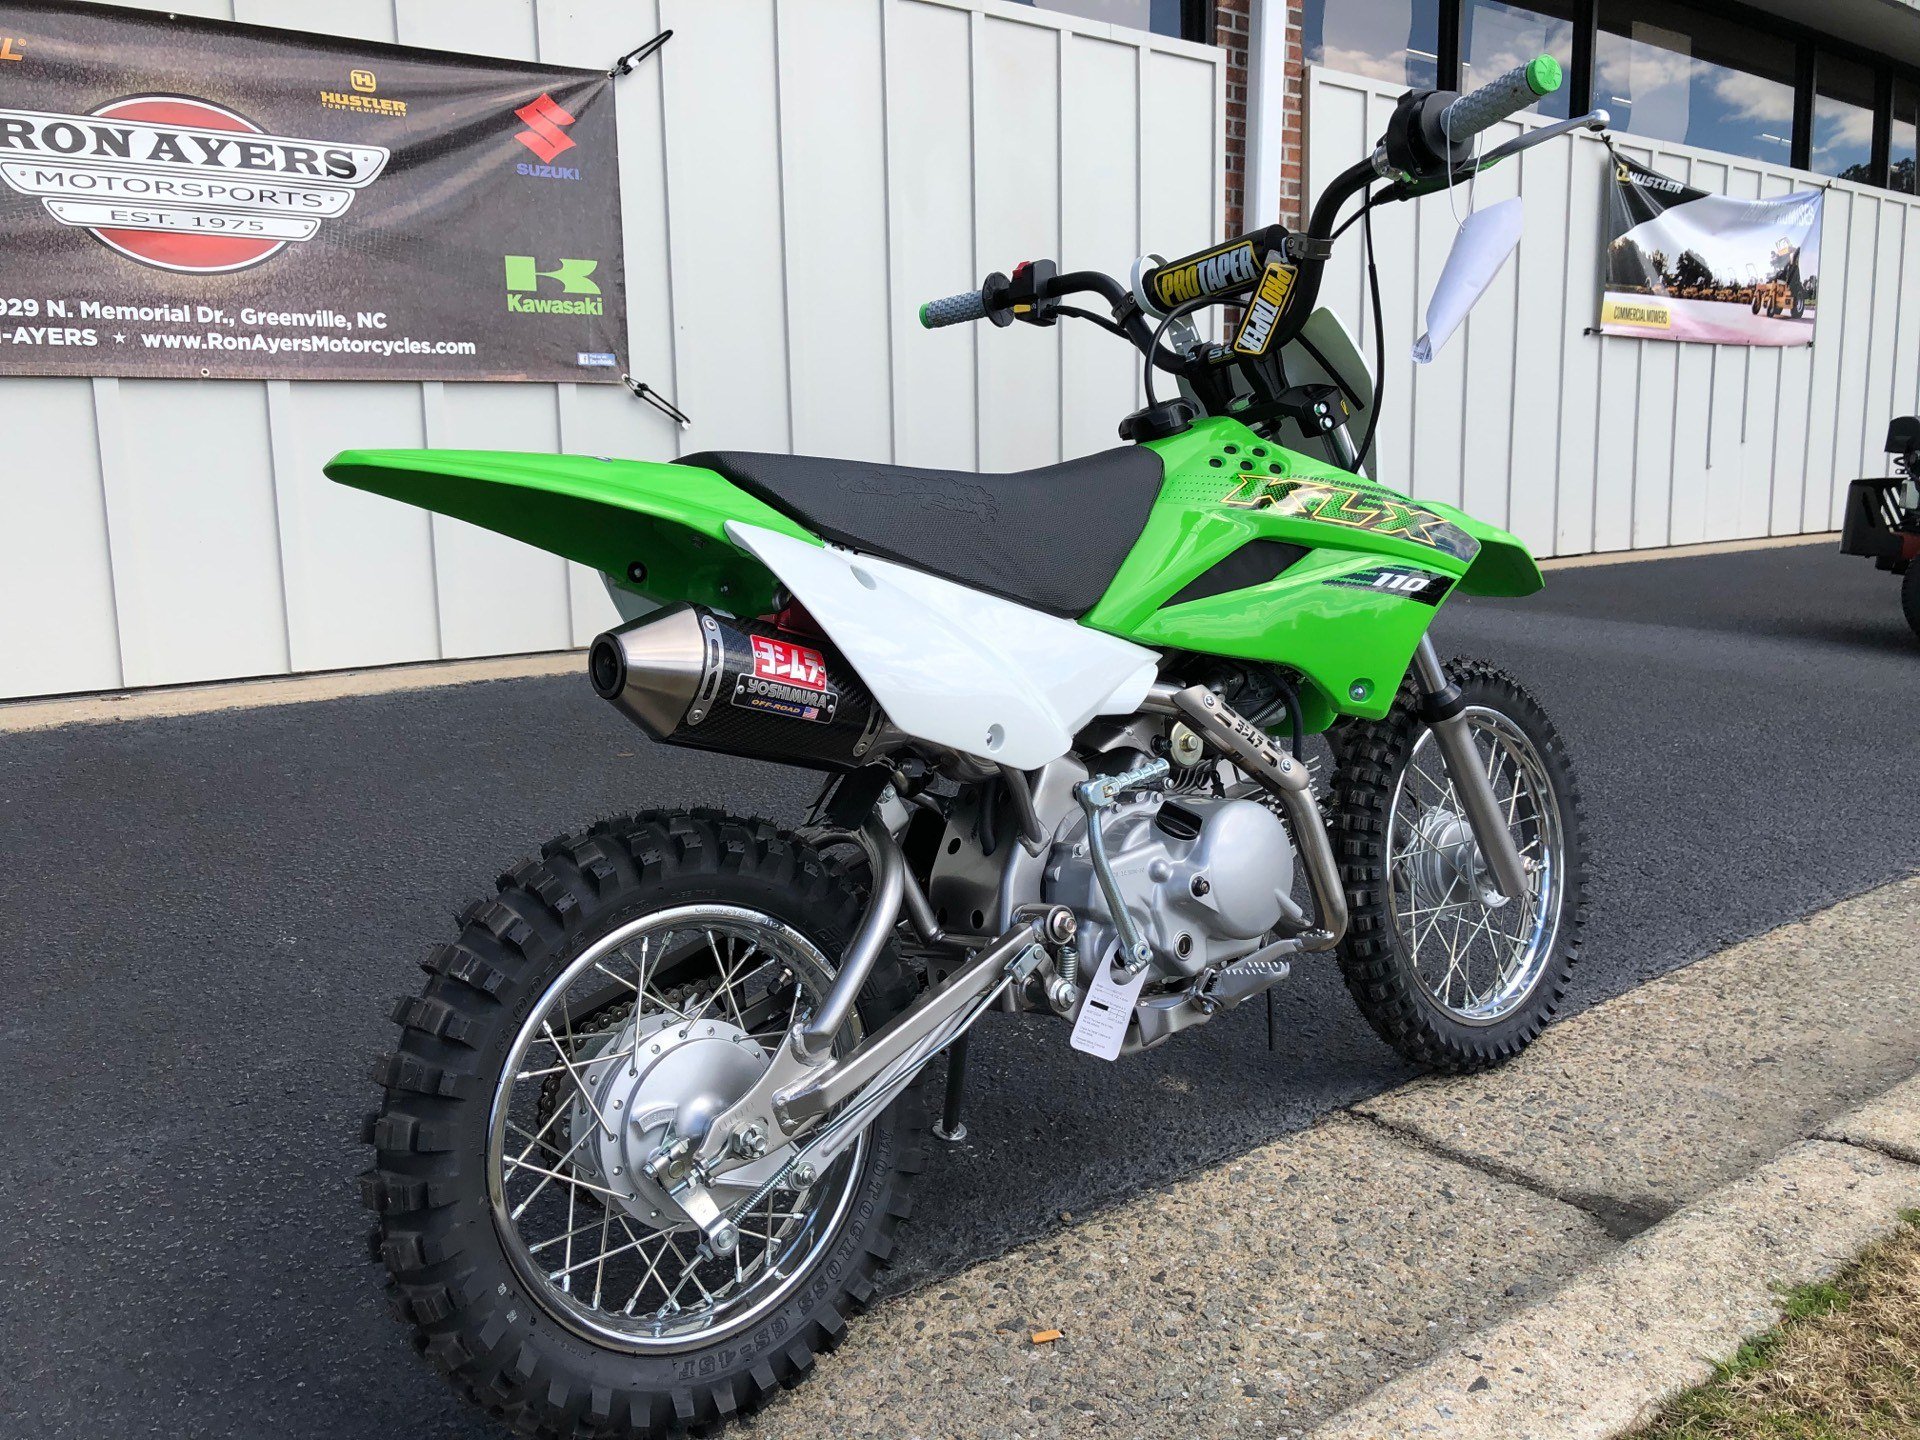 New 2020 Kawasaki KLX 110 Motorcycles in Greenville, NC | Stock Number: N/A